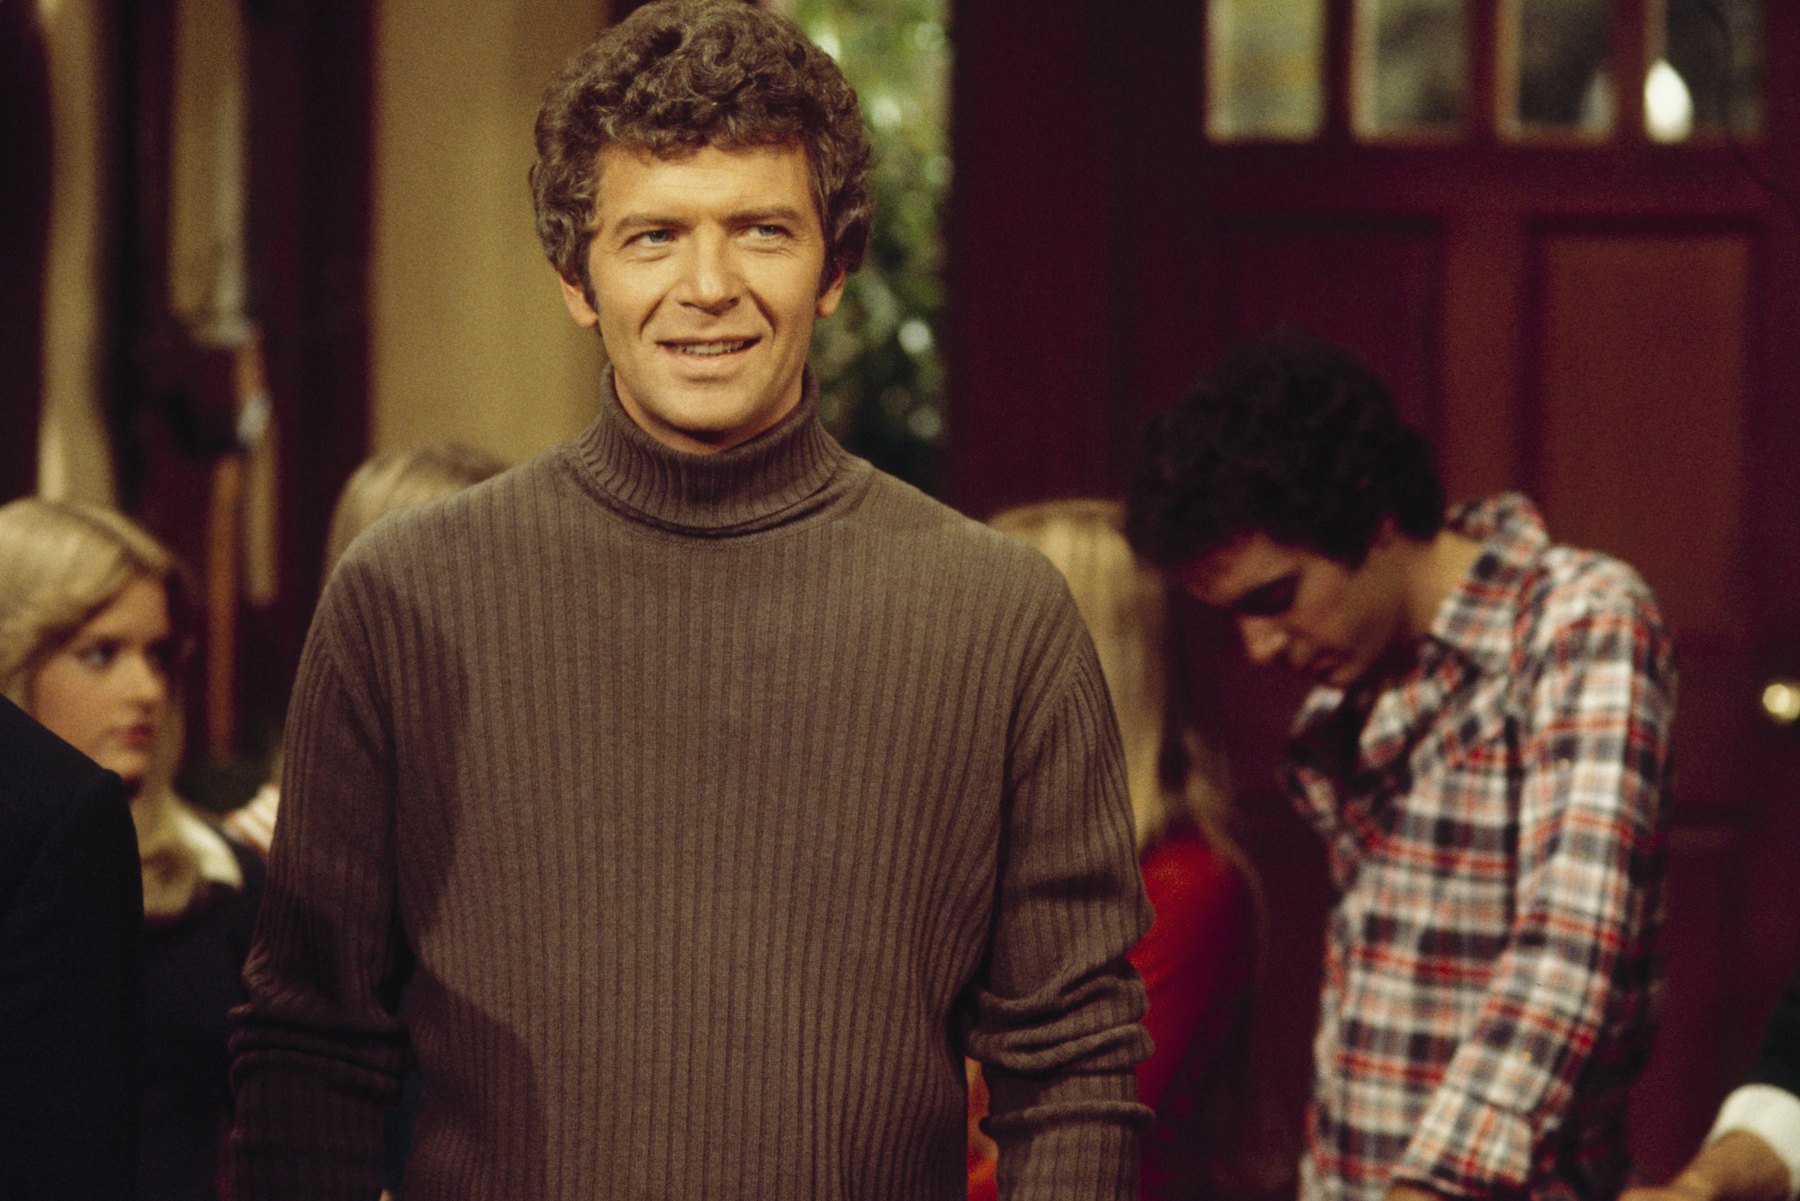 ‘The Brady Bunch’ Star Robert Reed ‘Nearly Got Into a Fistfight’ Over This Idea: ‘He Thought the Show Was Garbage’